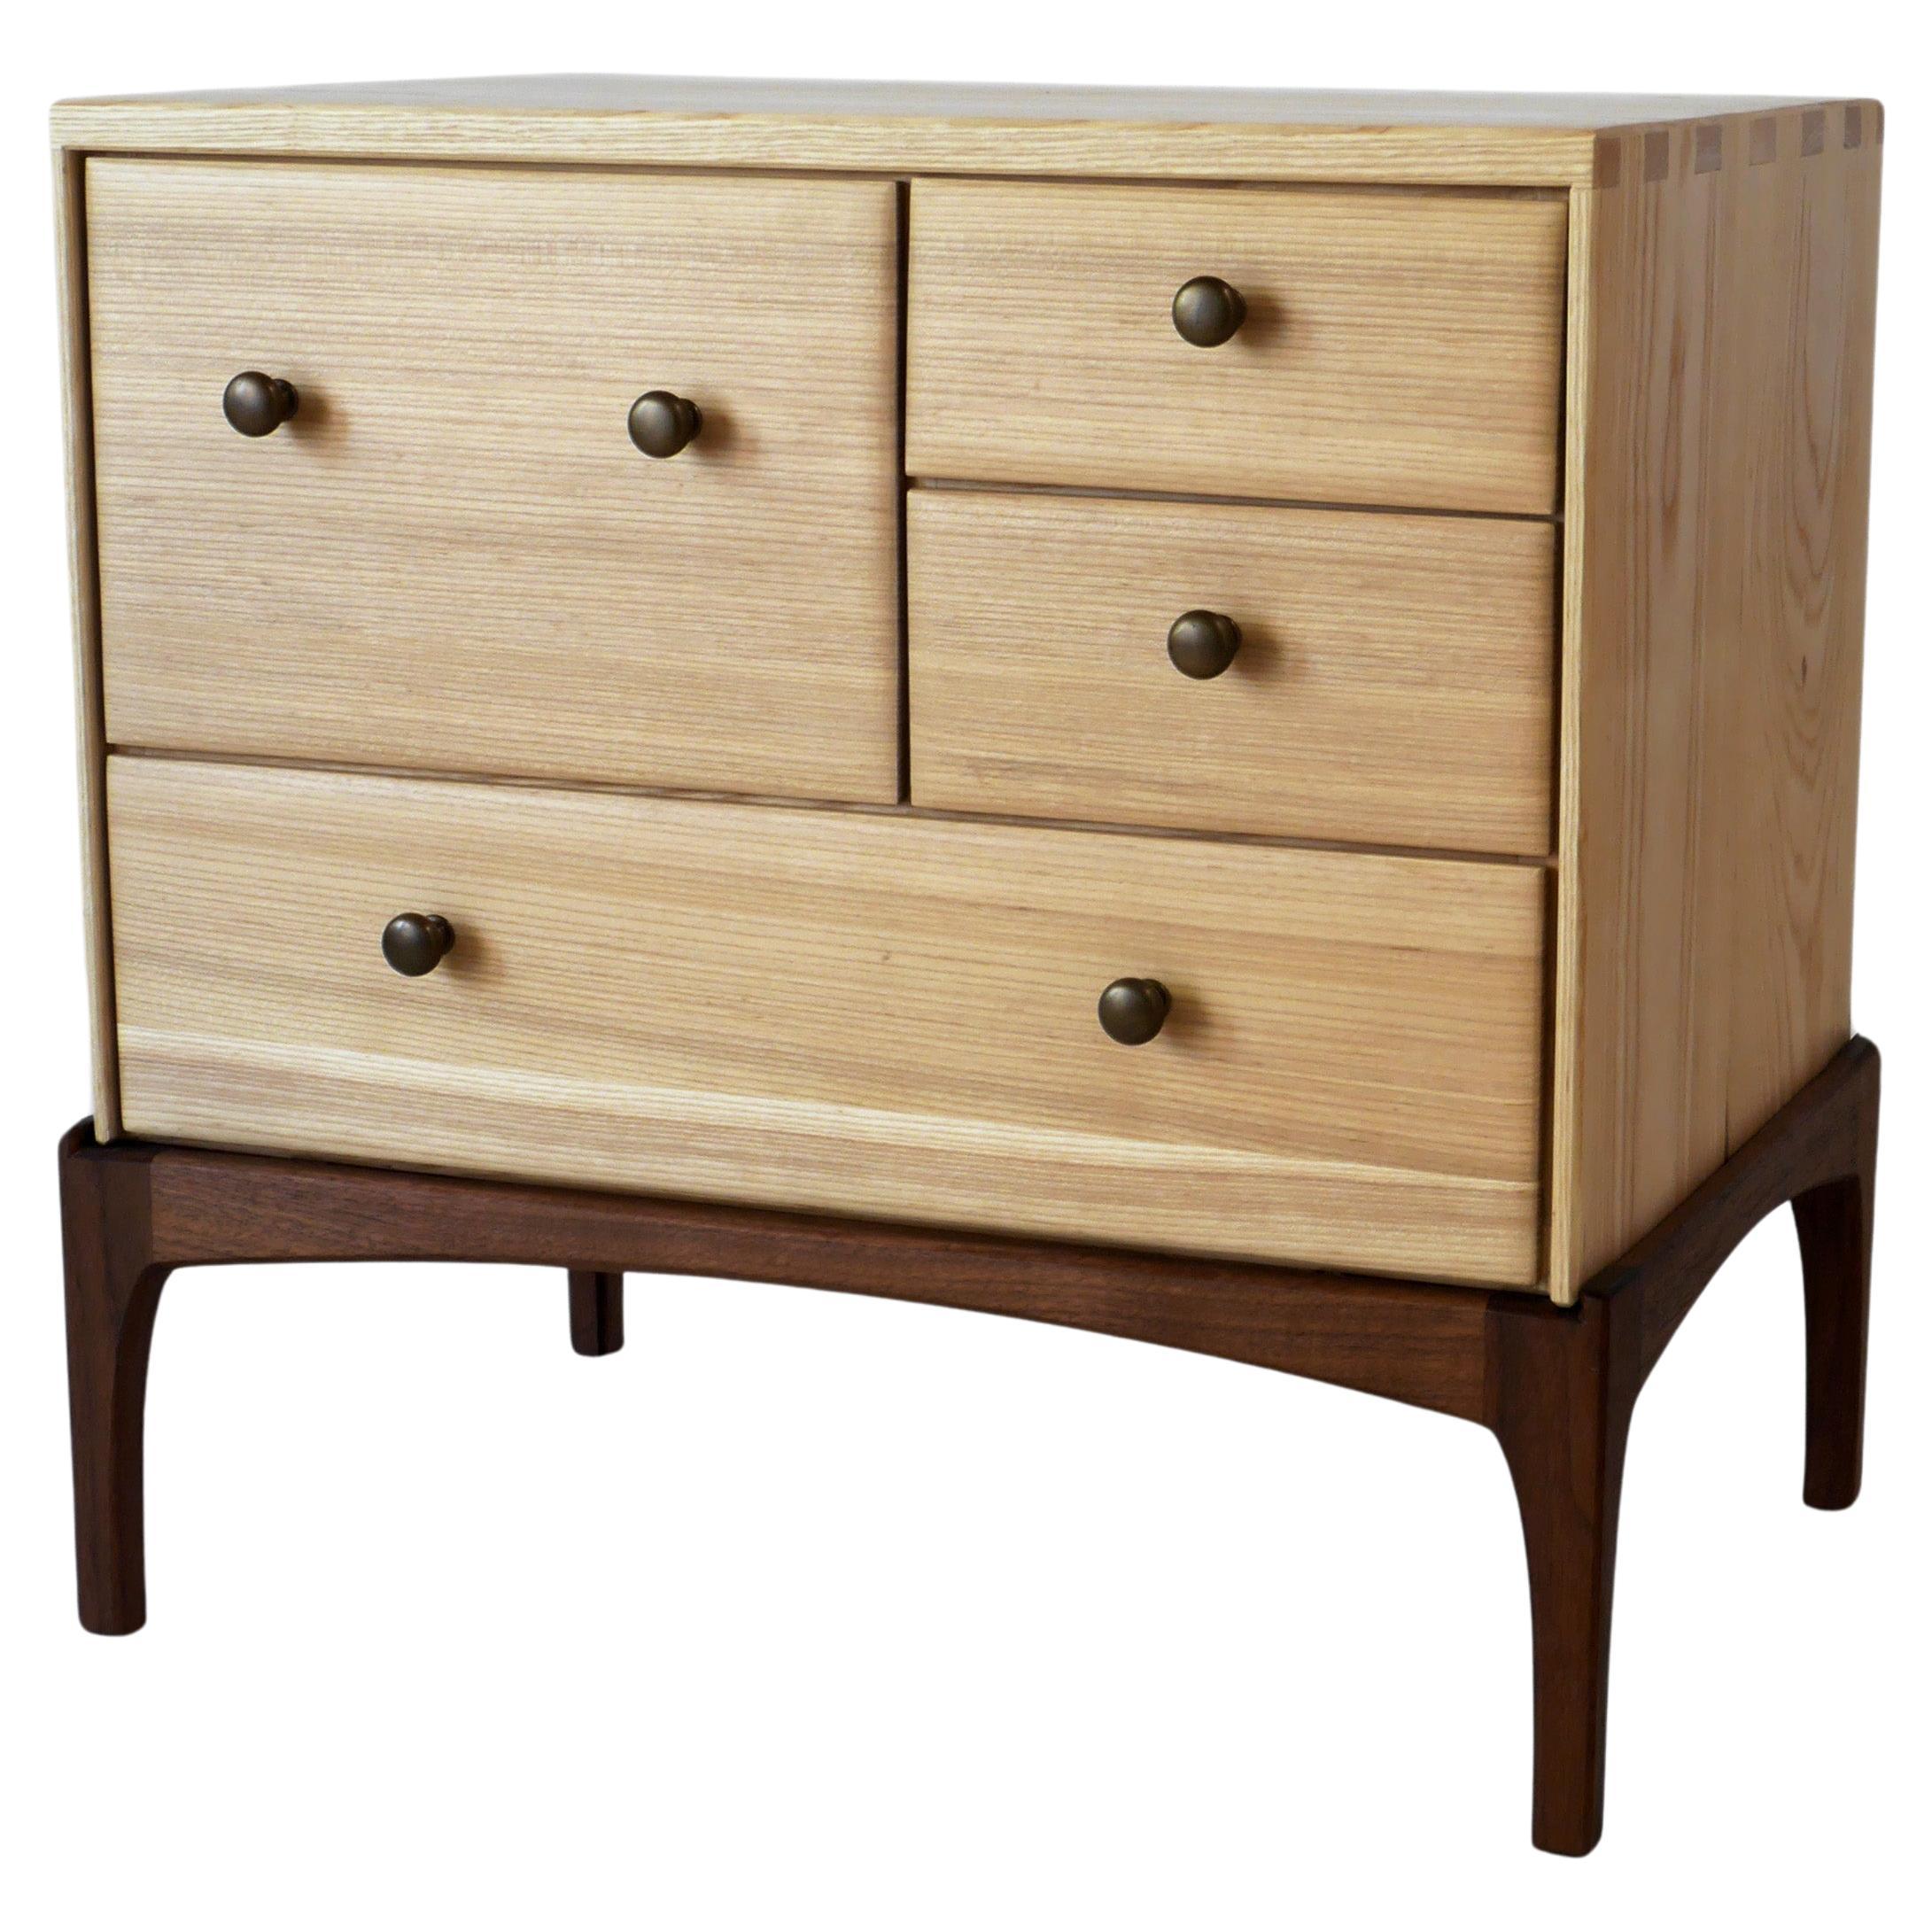 Ash Aurora Nightstand Four Drawer Modern Bedside Table/ Chest of Drawers by Arid For Sale